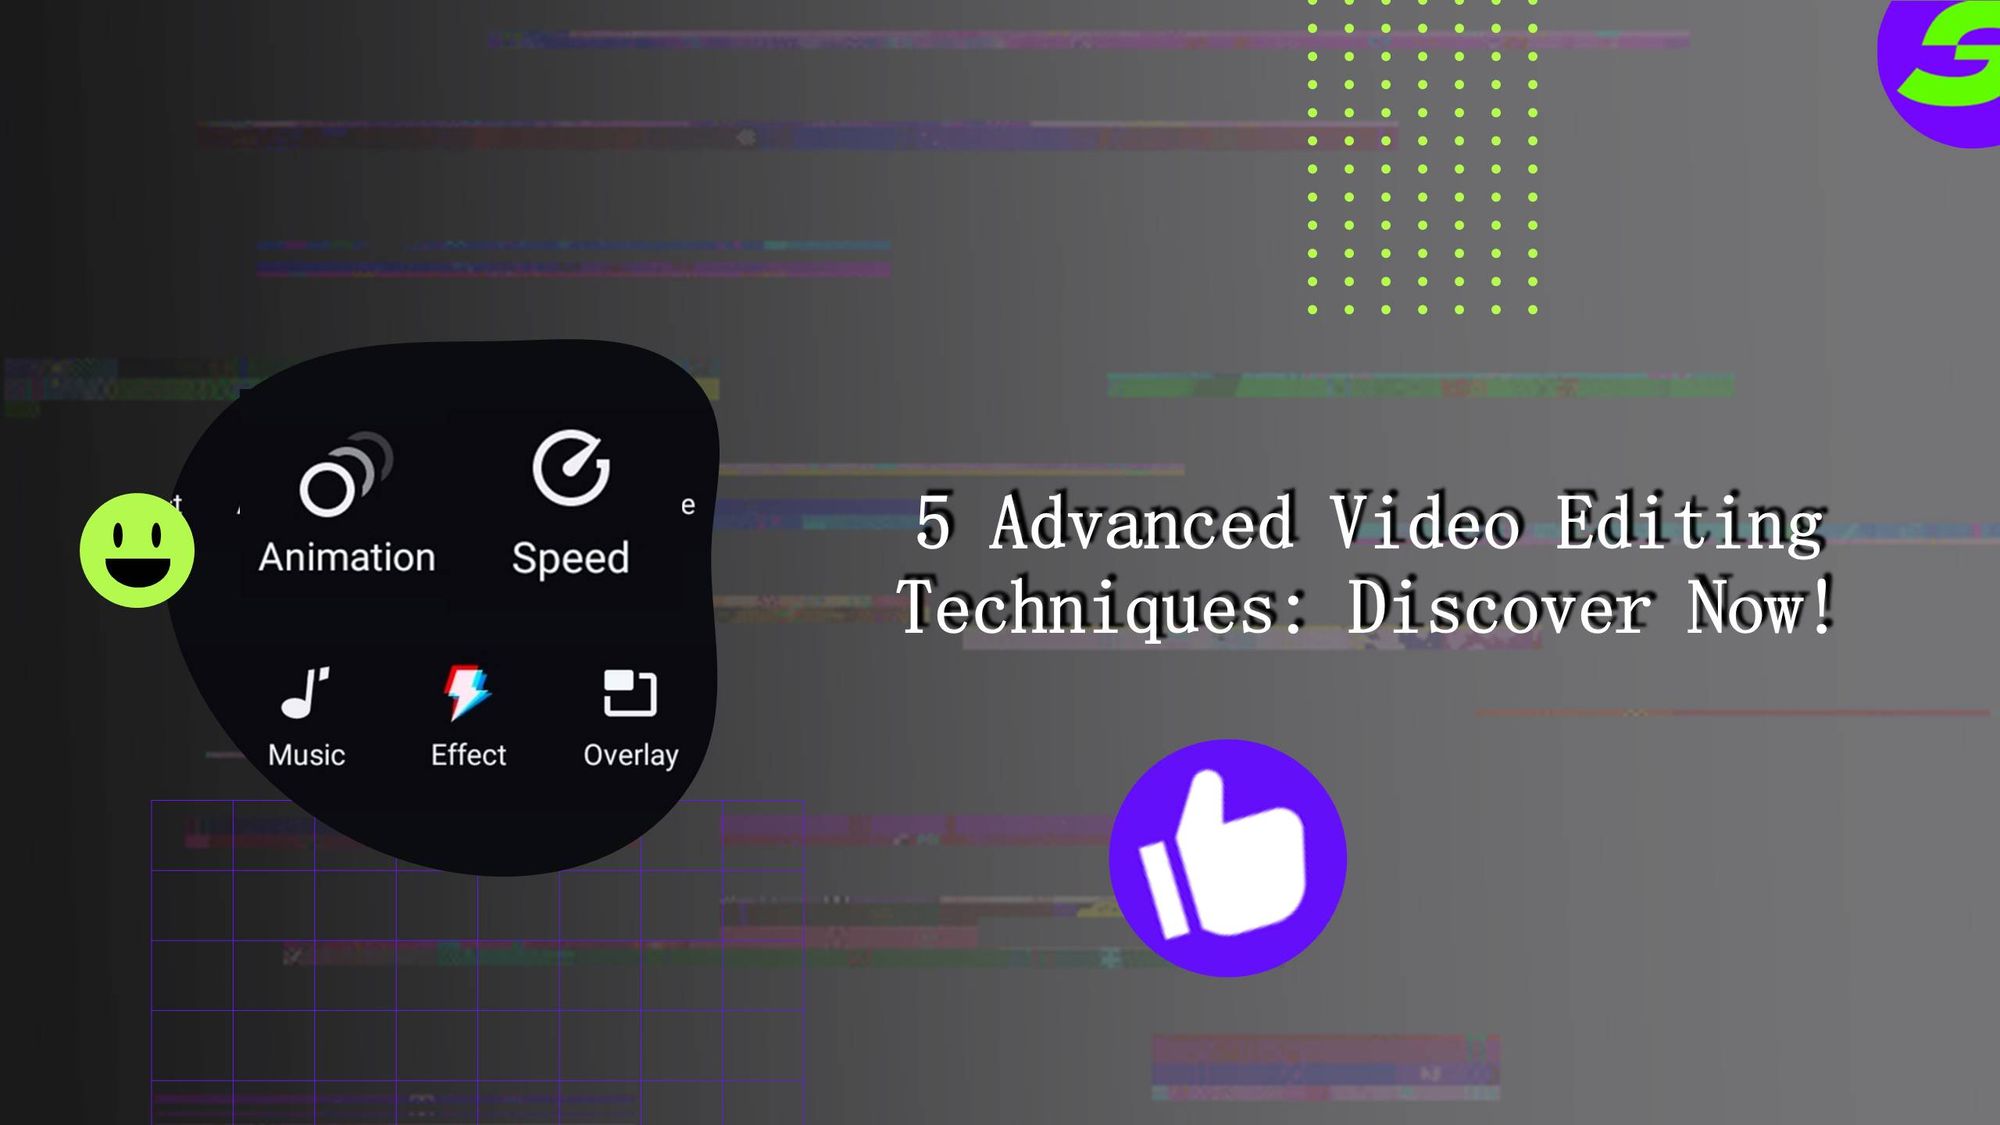 Advanced Video Editing Techniques for Android video editor